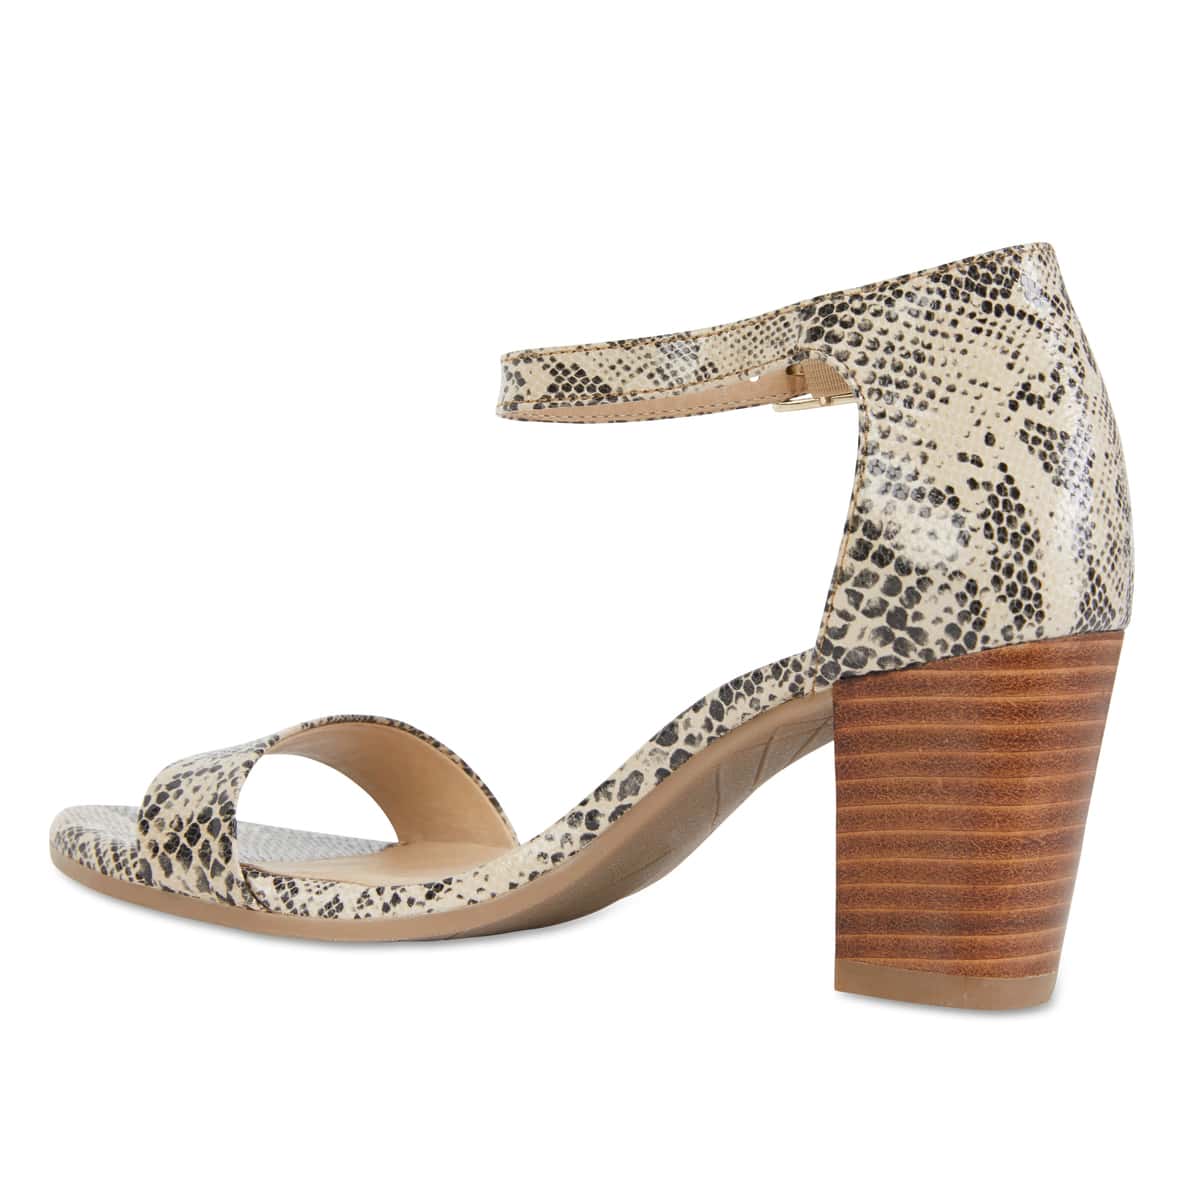 Beyond Heel in Snake Leather